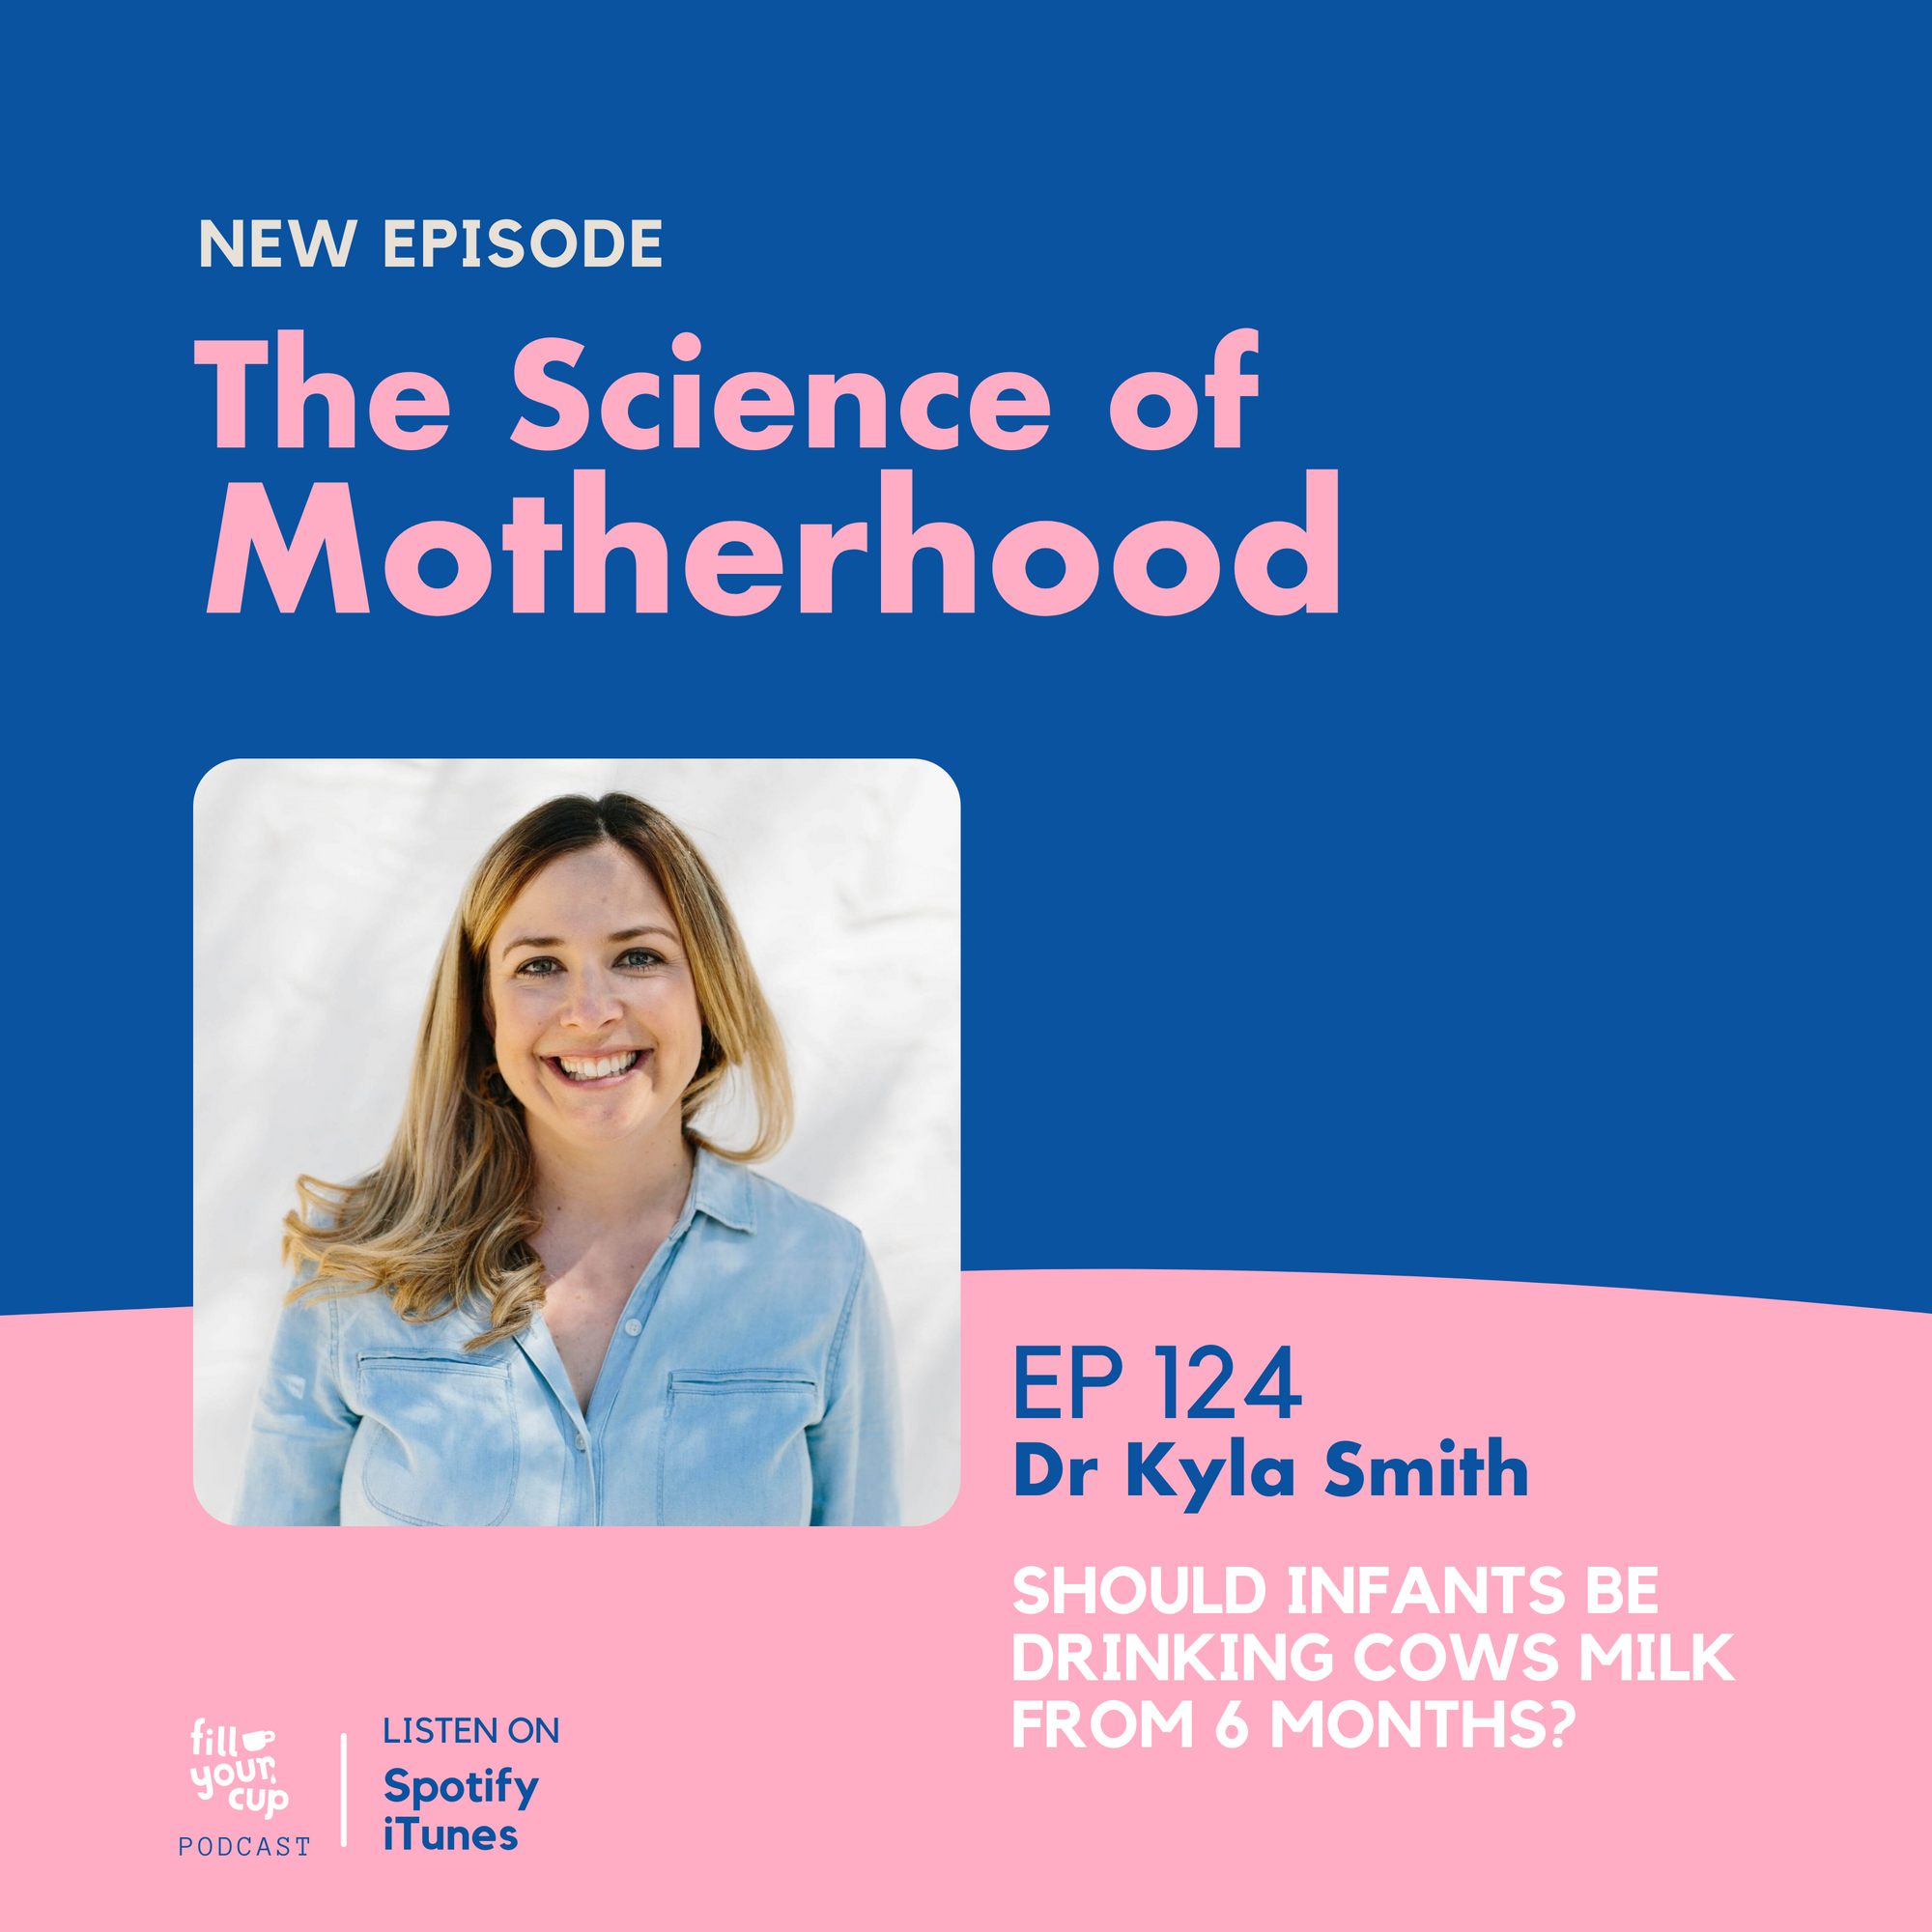 Ep 124. Dr Kyla Smith - Should Infants be drinking cows milk from 6 months?